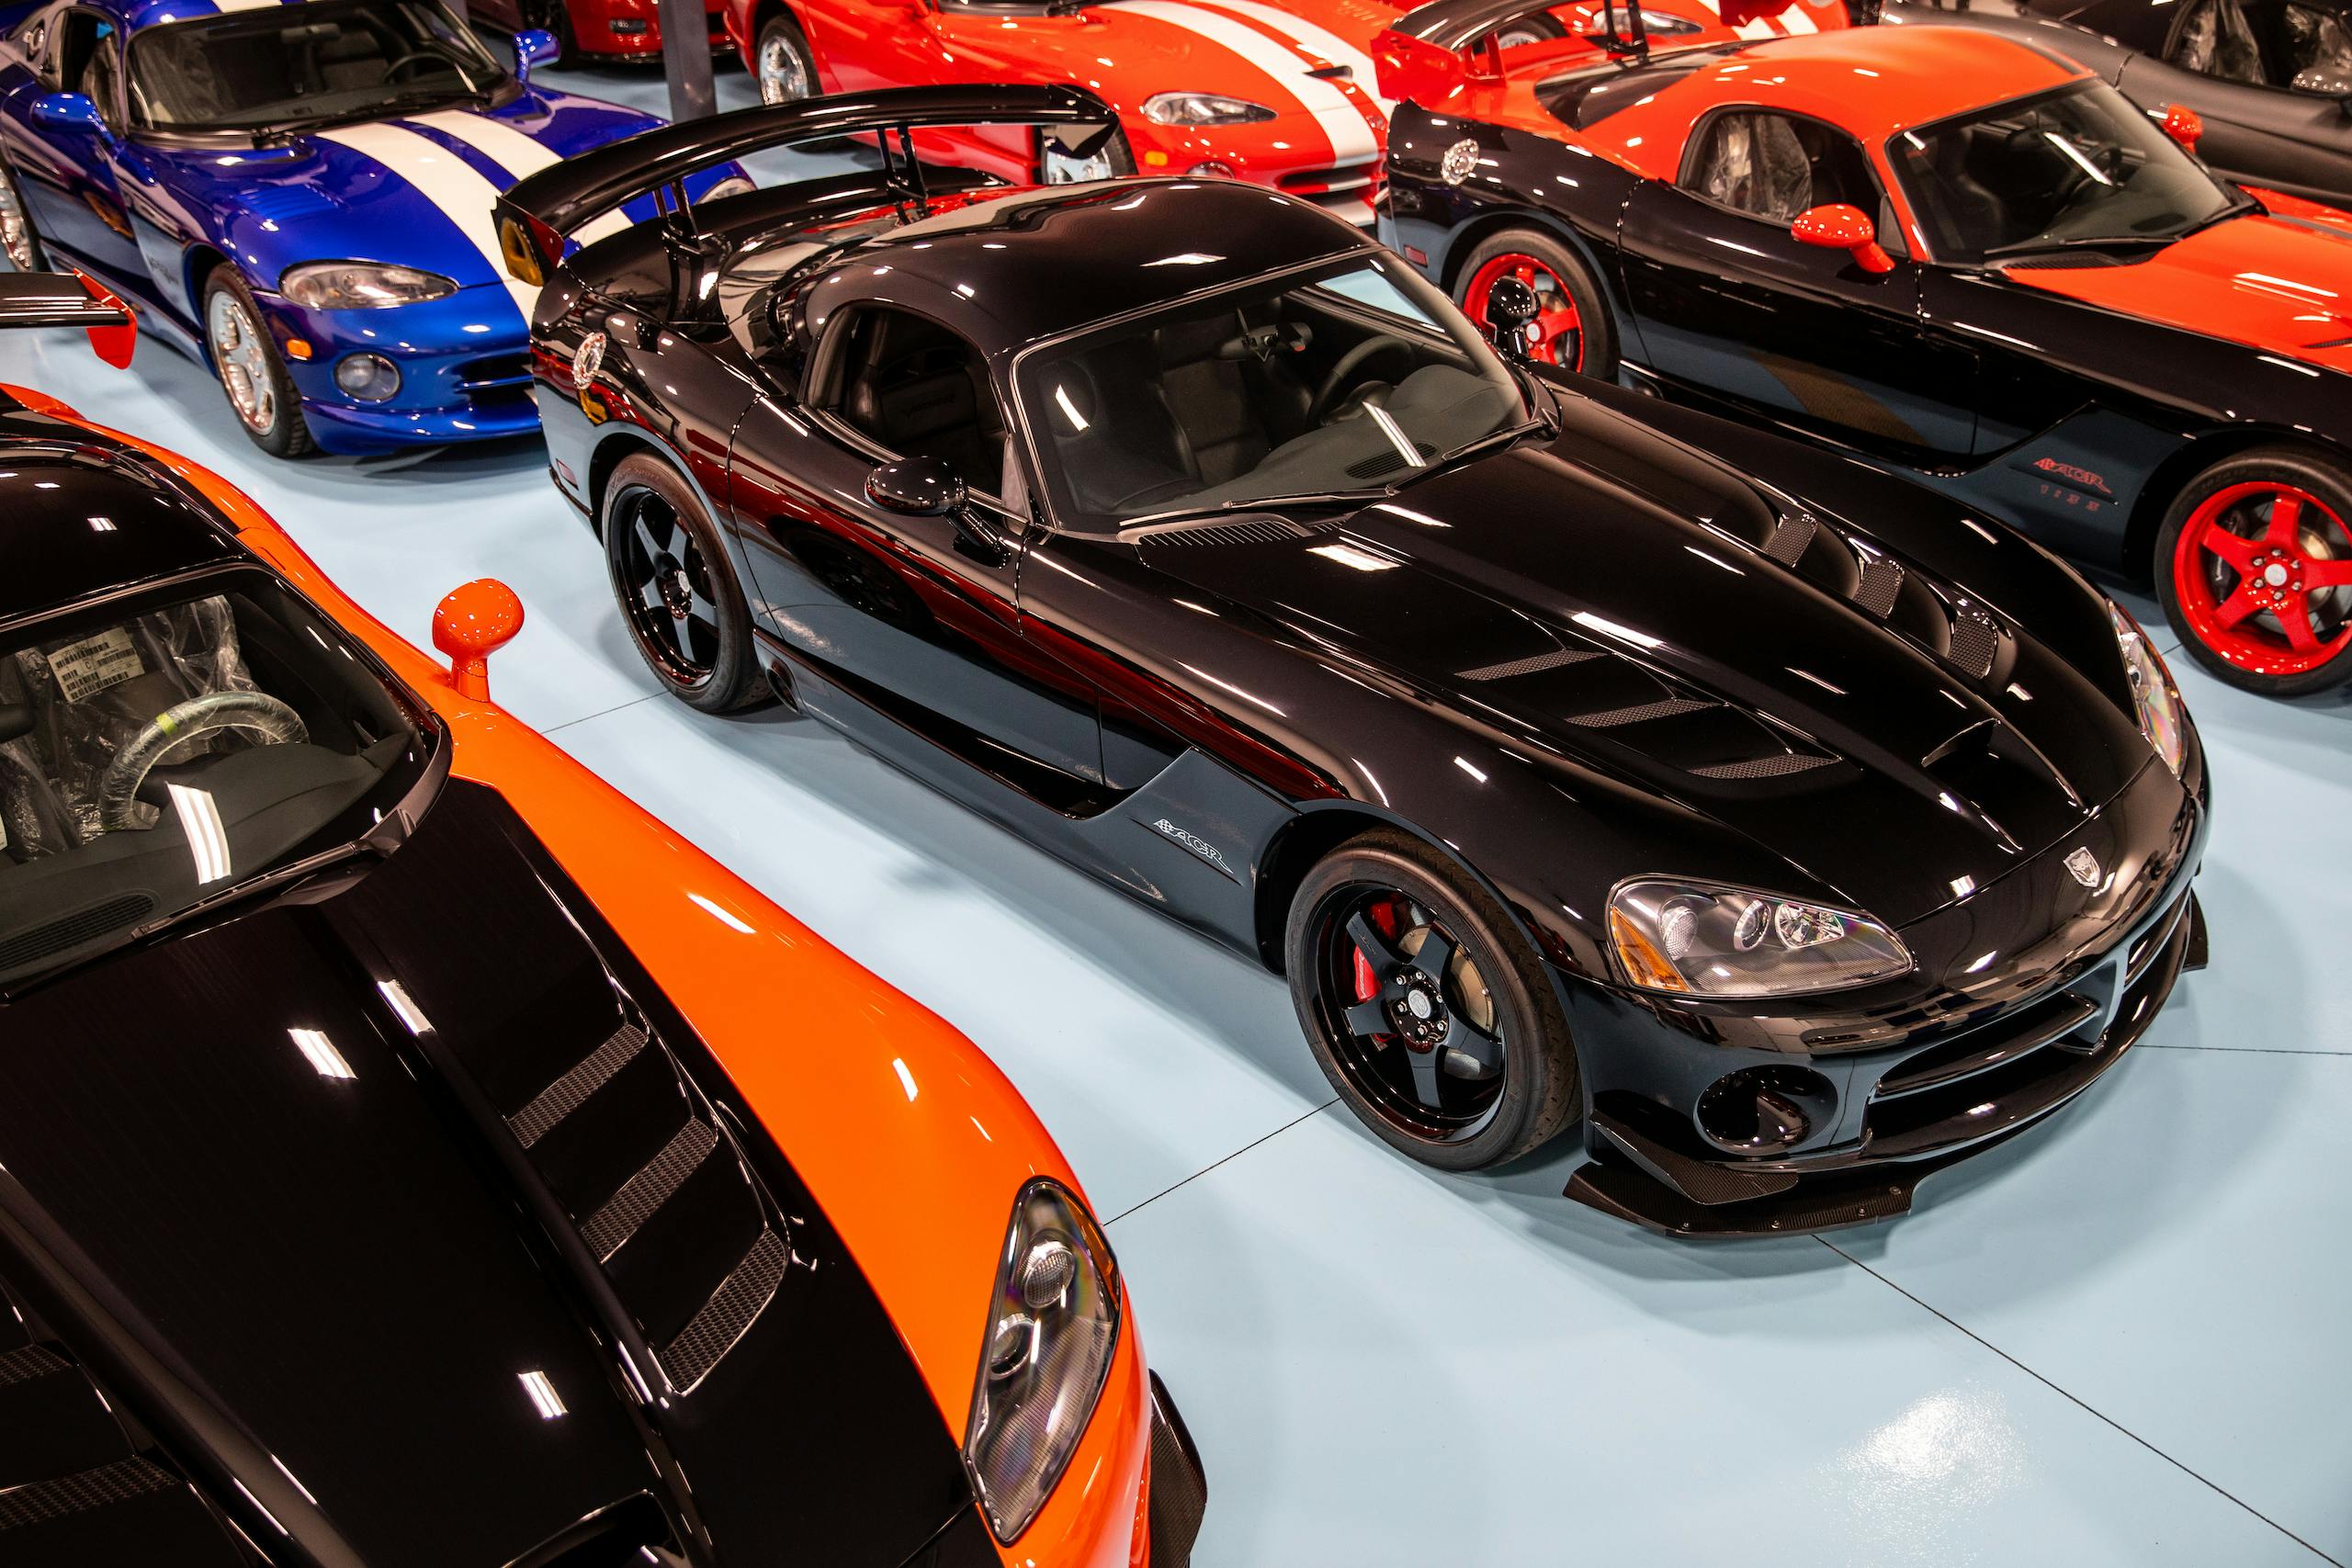 Viper collection